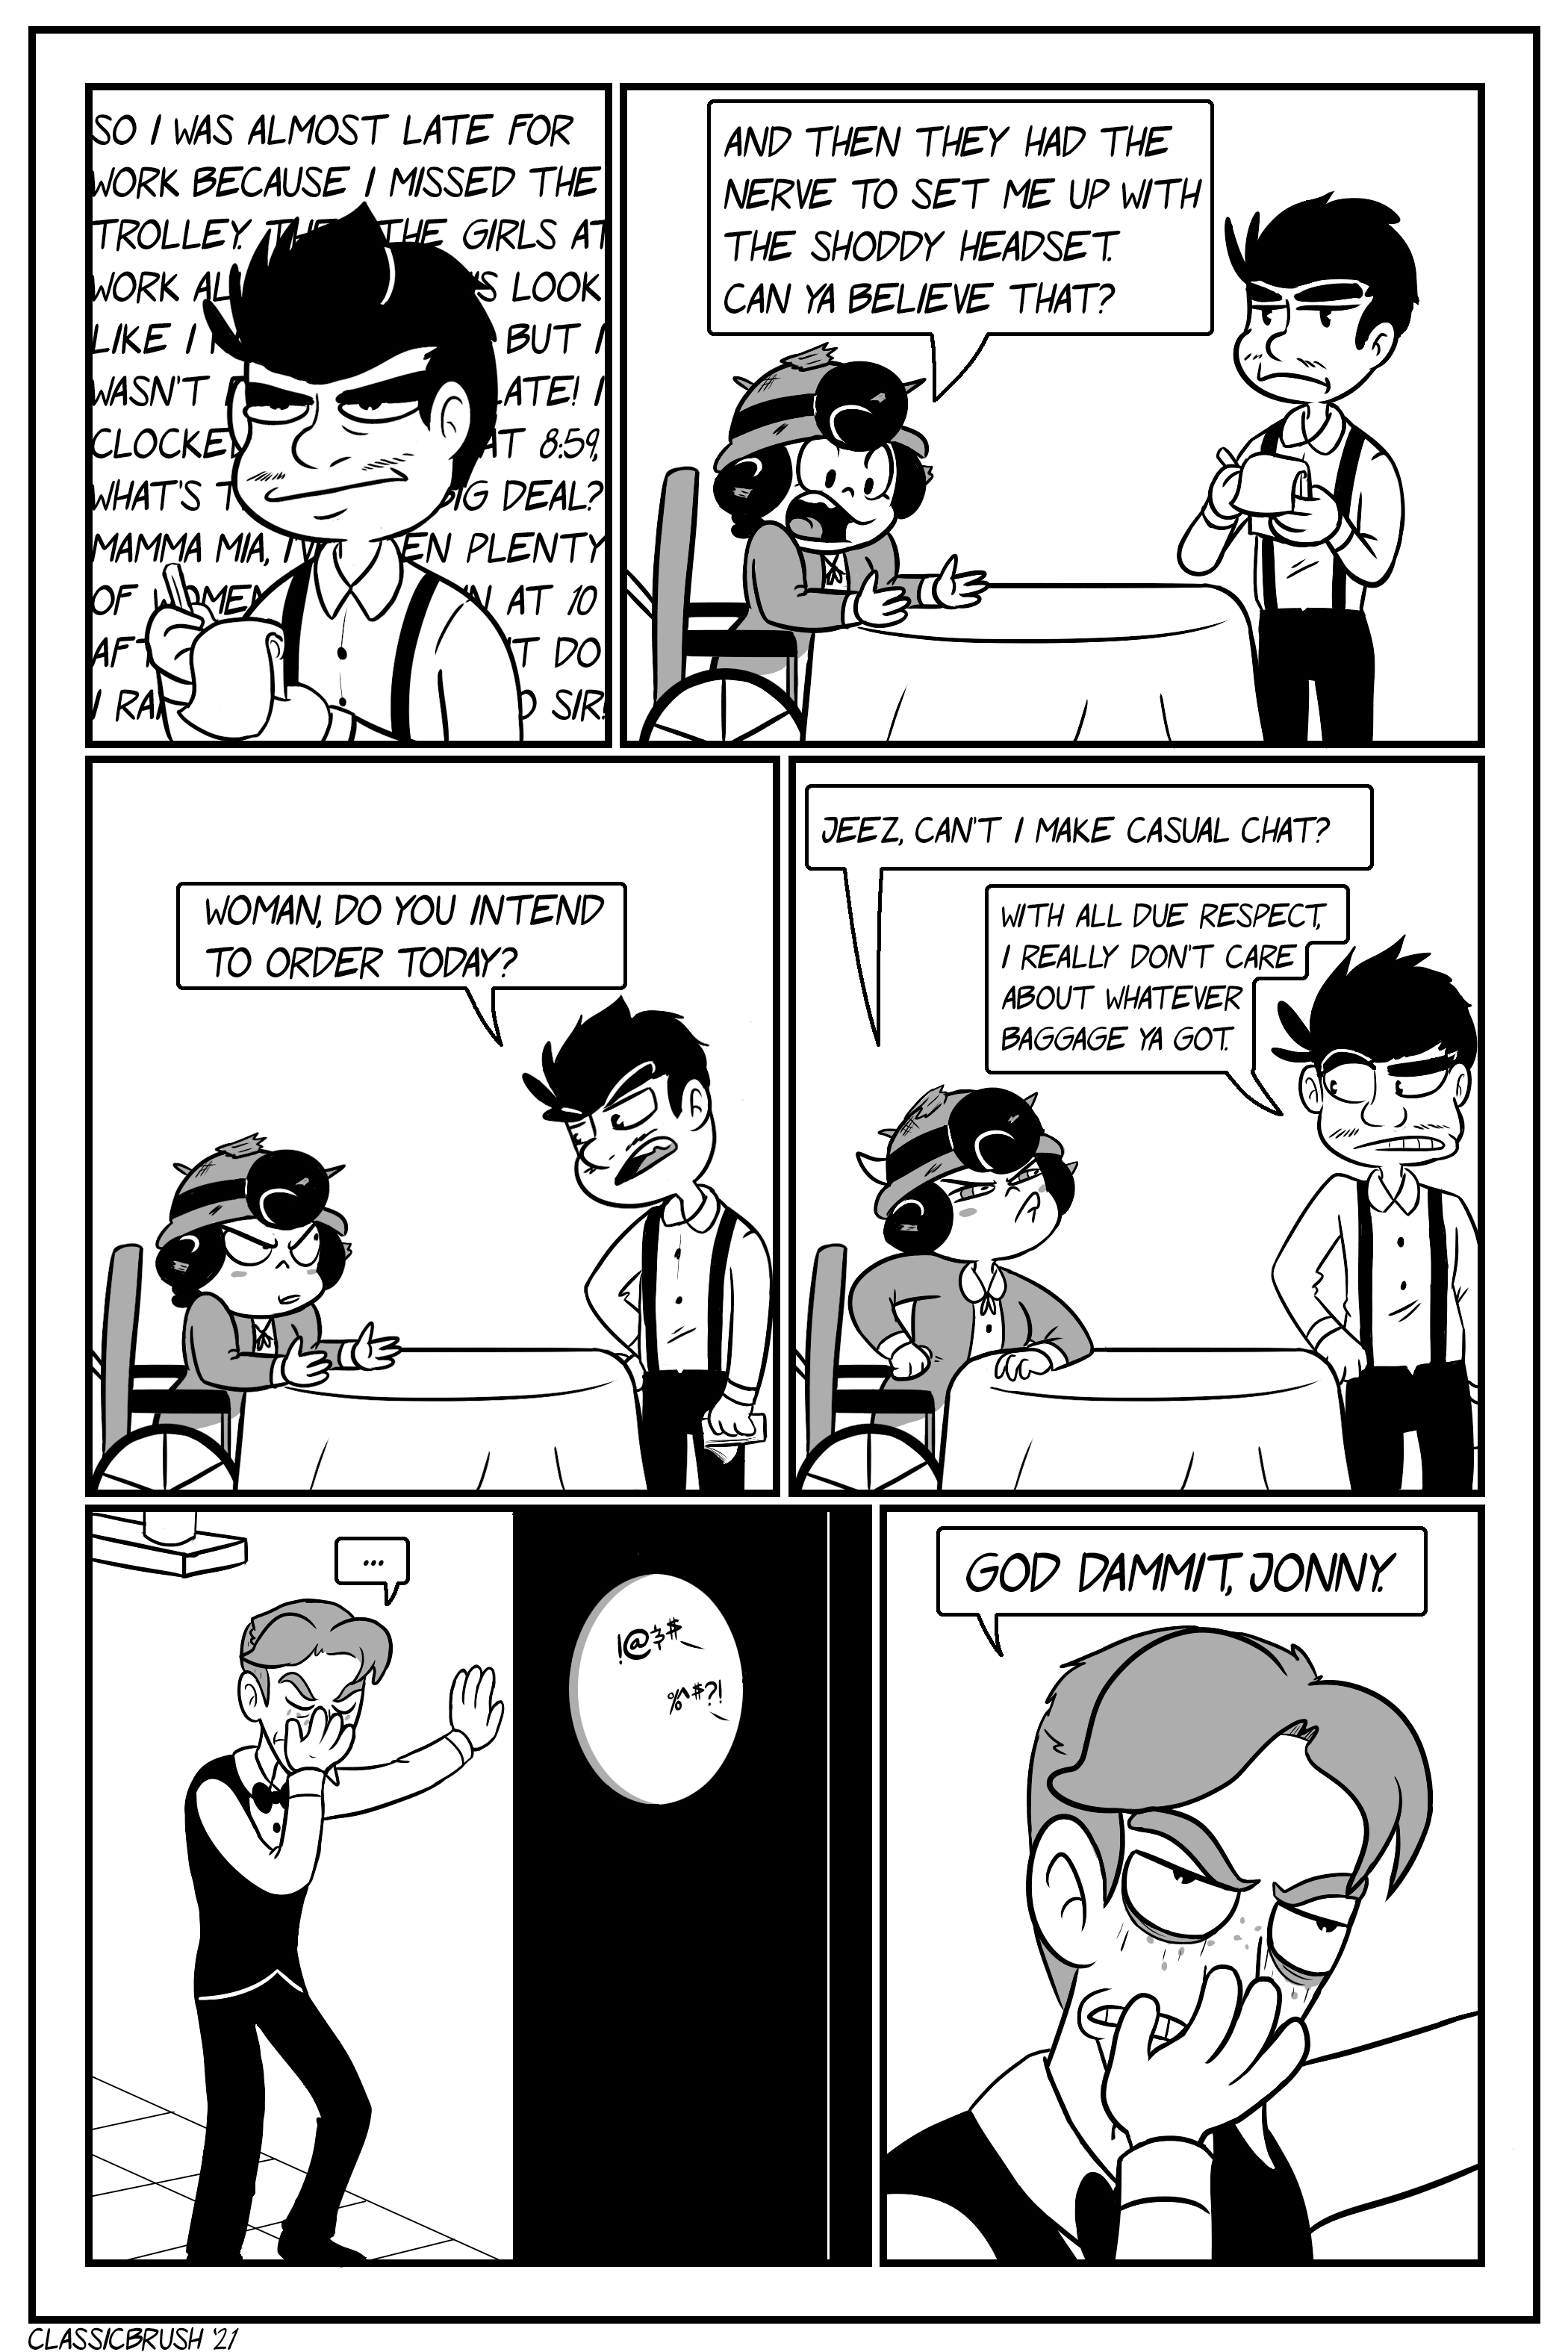 Panel 1: Jonny is standing with notebook in hand, waiting on Audreyâ€™s order. He is visibly displeased as she goes on about her day with her dialogue taking up the space behind him. Panel 2: Audrey, still covered in leftover broken door debris, finishes up as Jonny waits. â€œAnd then they had the nerve to set me up with the shoddy headset. Can ya believe that?â€ Panel 3: Jonny leans toward Audrey, annoyed. â€œWoman, do you intend to order today?â€ Panel 4: Audrey is annoyed at that remark, eyes reddening and ram horn appearing on head. â€œJeez, canâ€™t I make casual chat?â€ Jonny turns away, indifferent. â€œWith all due respect, I really donâ€™t care about whatever baggage ya gotâ€ Panel 5: Cut to Harrison in the kitchen, one hand leaning against the wall, the other hand holding his face in a facepalm as the heated interaction continues in the dining room. â€œâ€¦â€ Panel 6: Harrison looks up from the face palm in frustration, mumbling to himself. â€œGod dammit, Jonny.â€